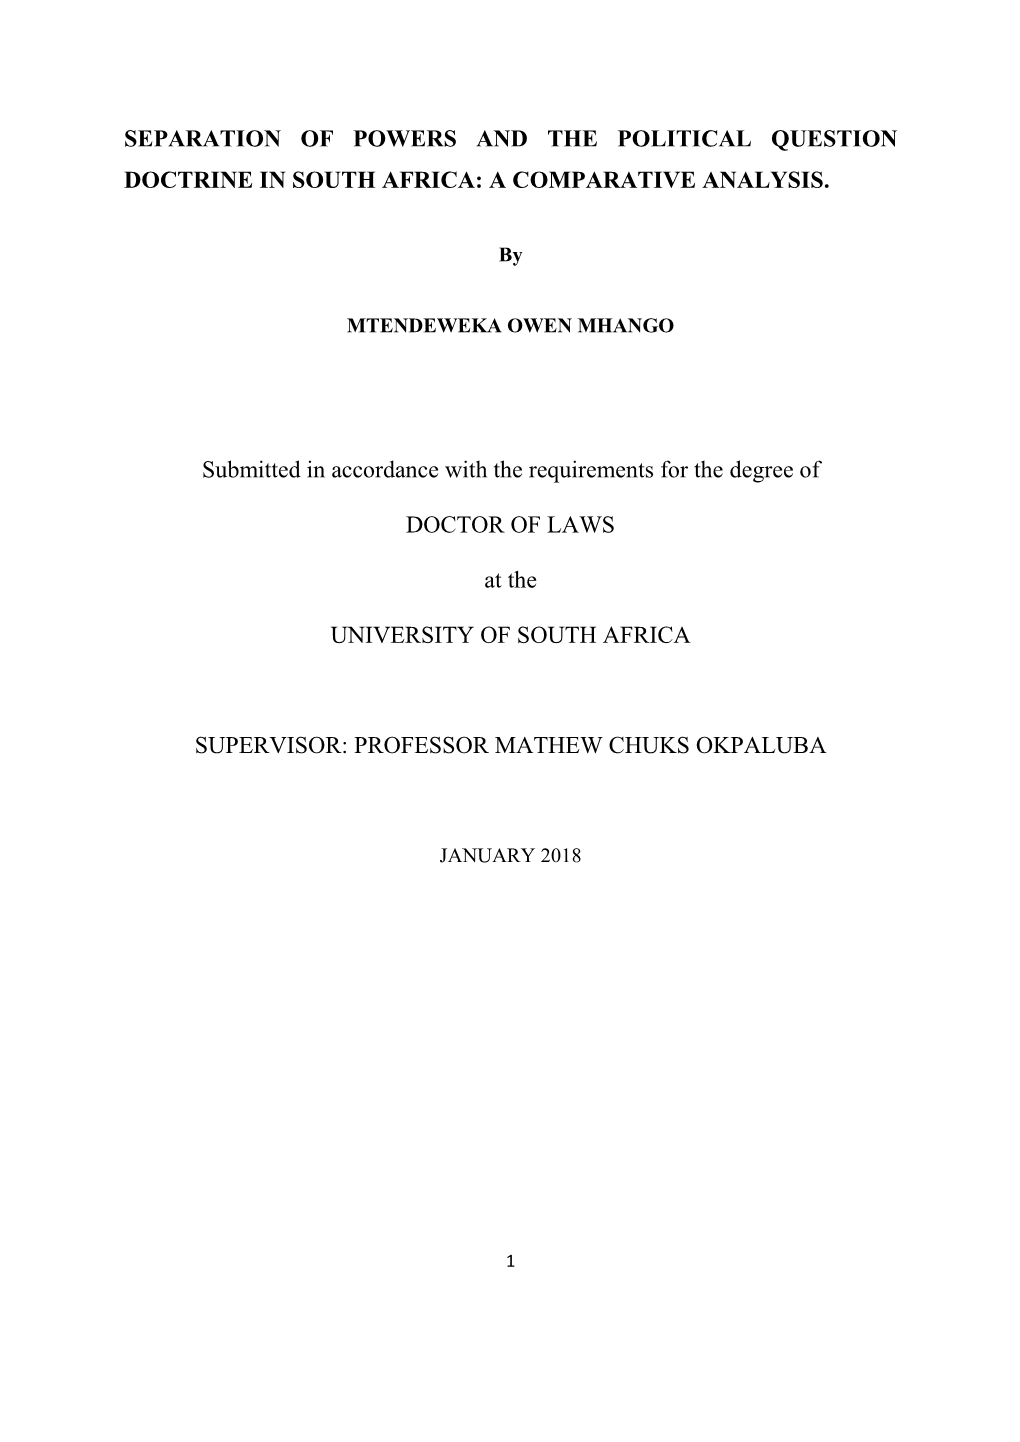 Separation of Powers and the Political Question Doctrine in South Africa: a Comparative Analysis